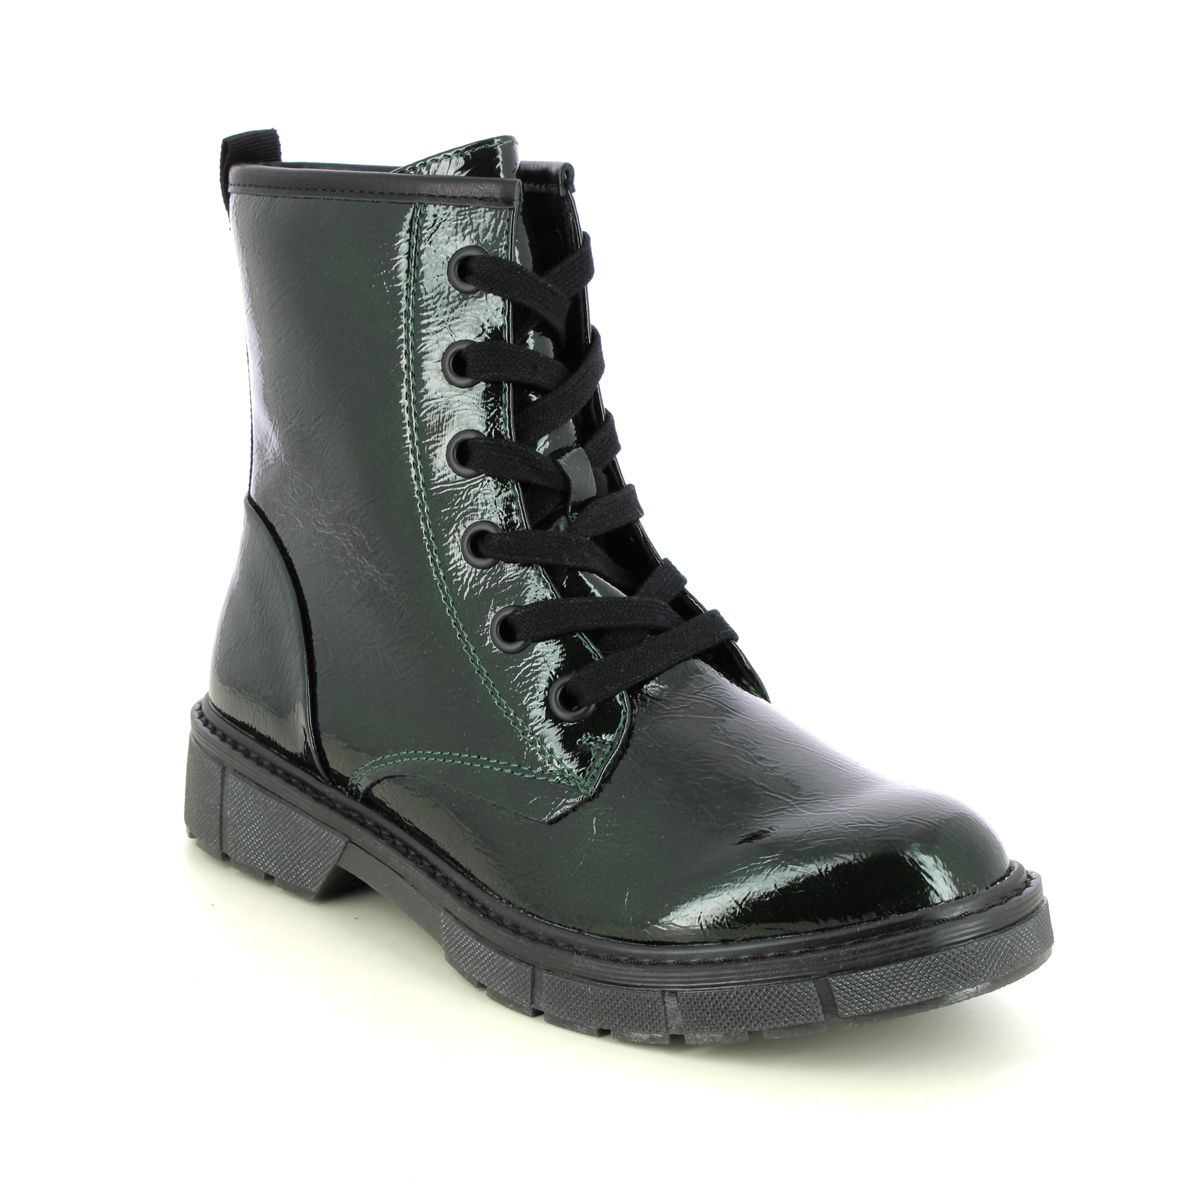 Marco Tozzi Badie  Lace Green Patent Womens Biker Boots 25282-41-789 In Size 38 In Plain Green Patent